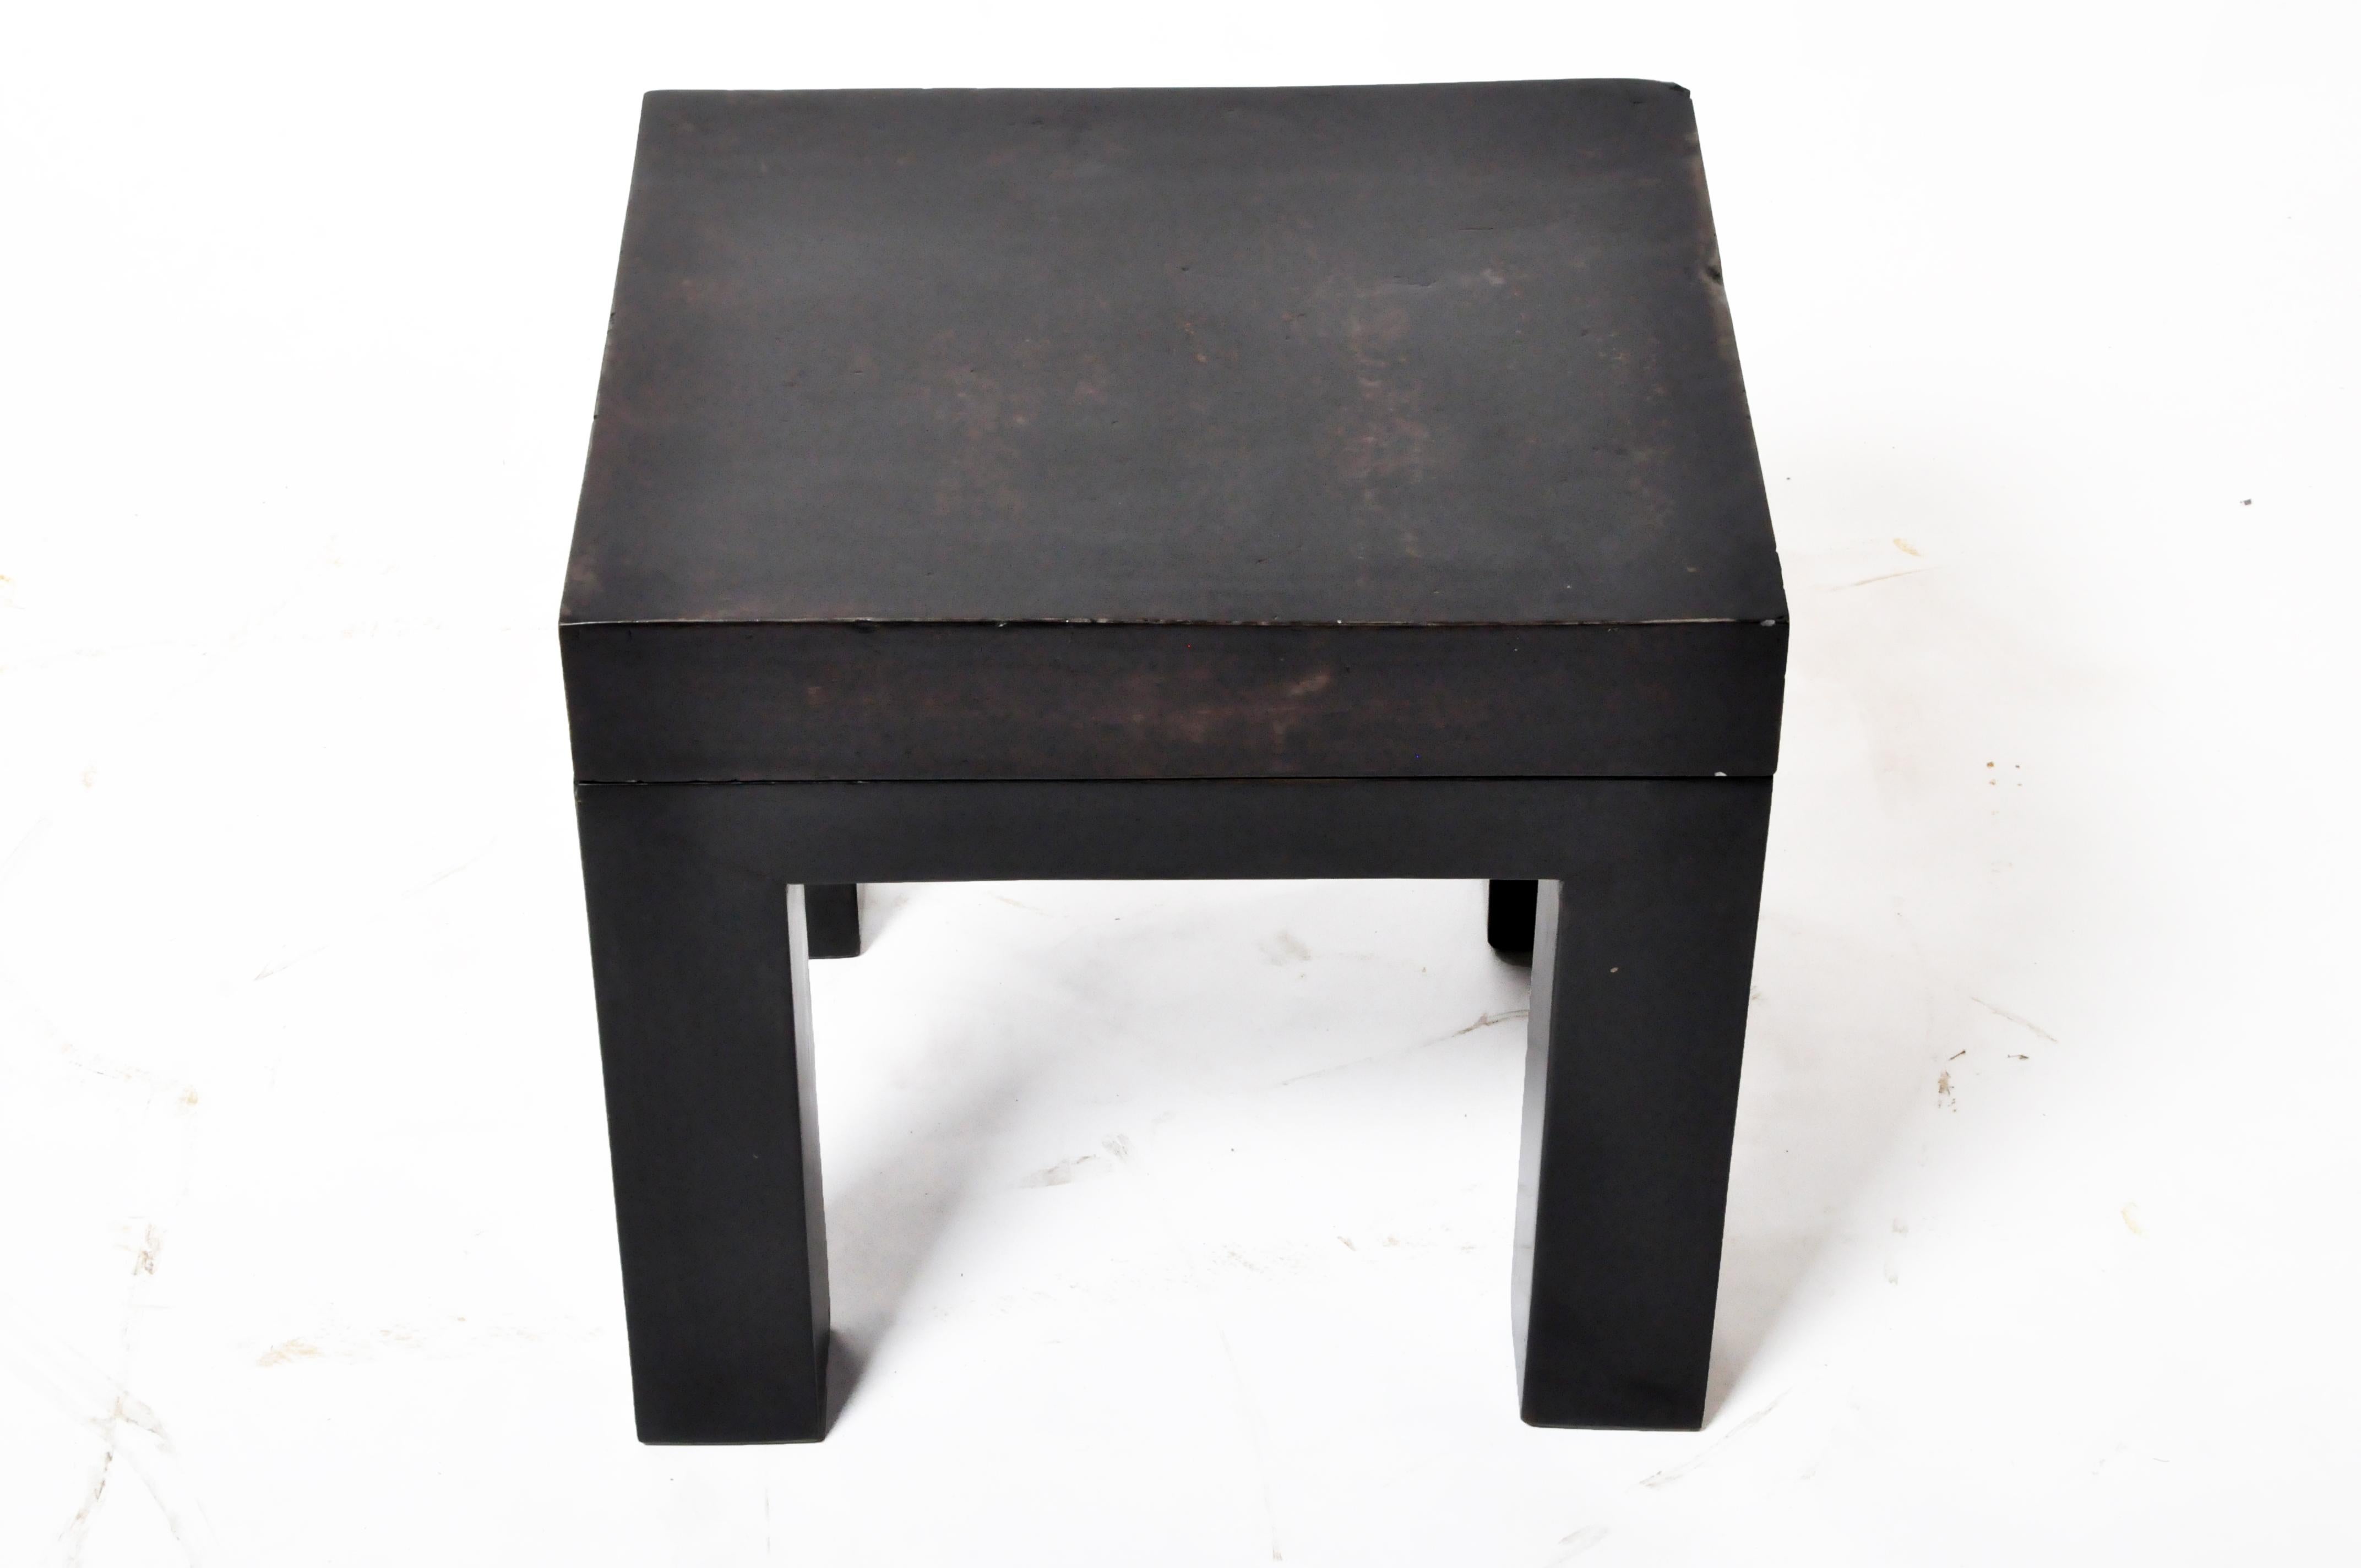 This small table or stool features a new wooden base mated to an old terra cotta tile top. The traditional floors of Chinese mansions were made from terracotta tiles laid in a grid. Terracotta was a lighter, easily-worked alternative to stone. Fine